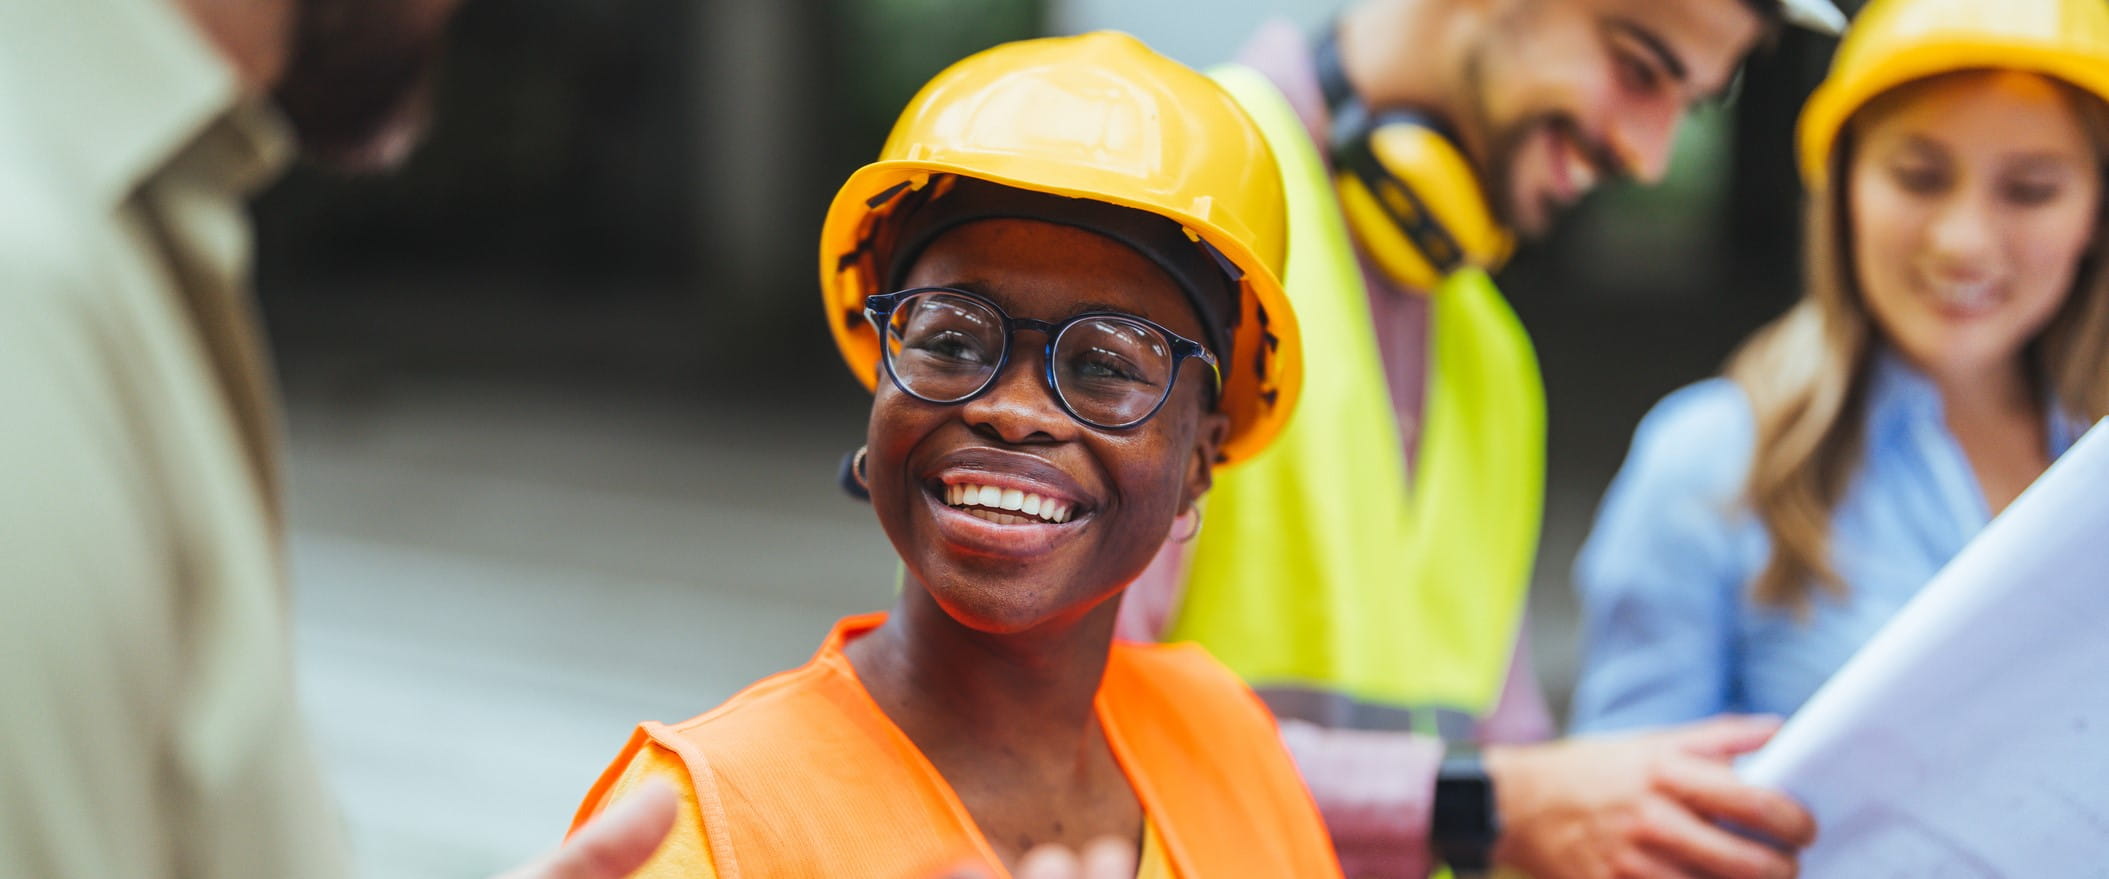 Worker in a hardhat and safety vest stands in a crowd of similarly dressed workers, smiling.